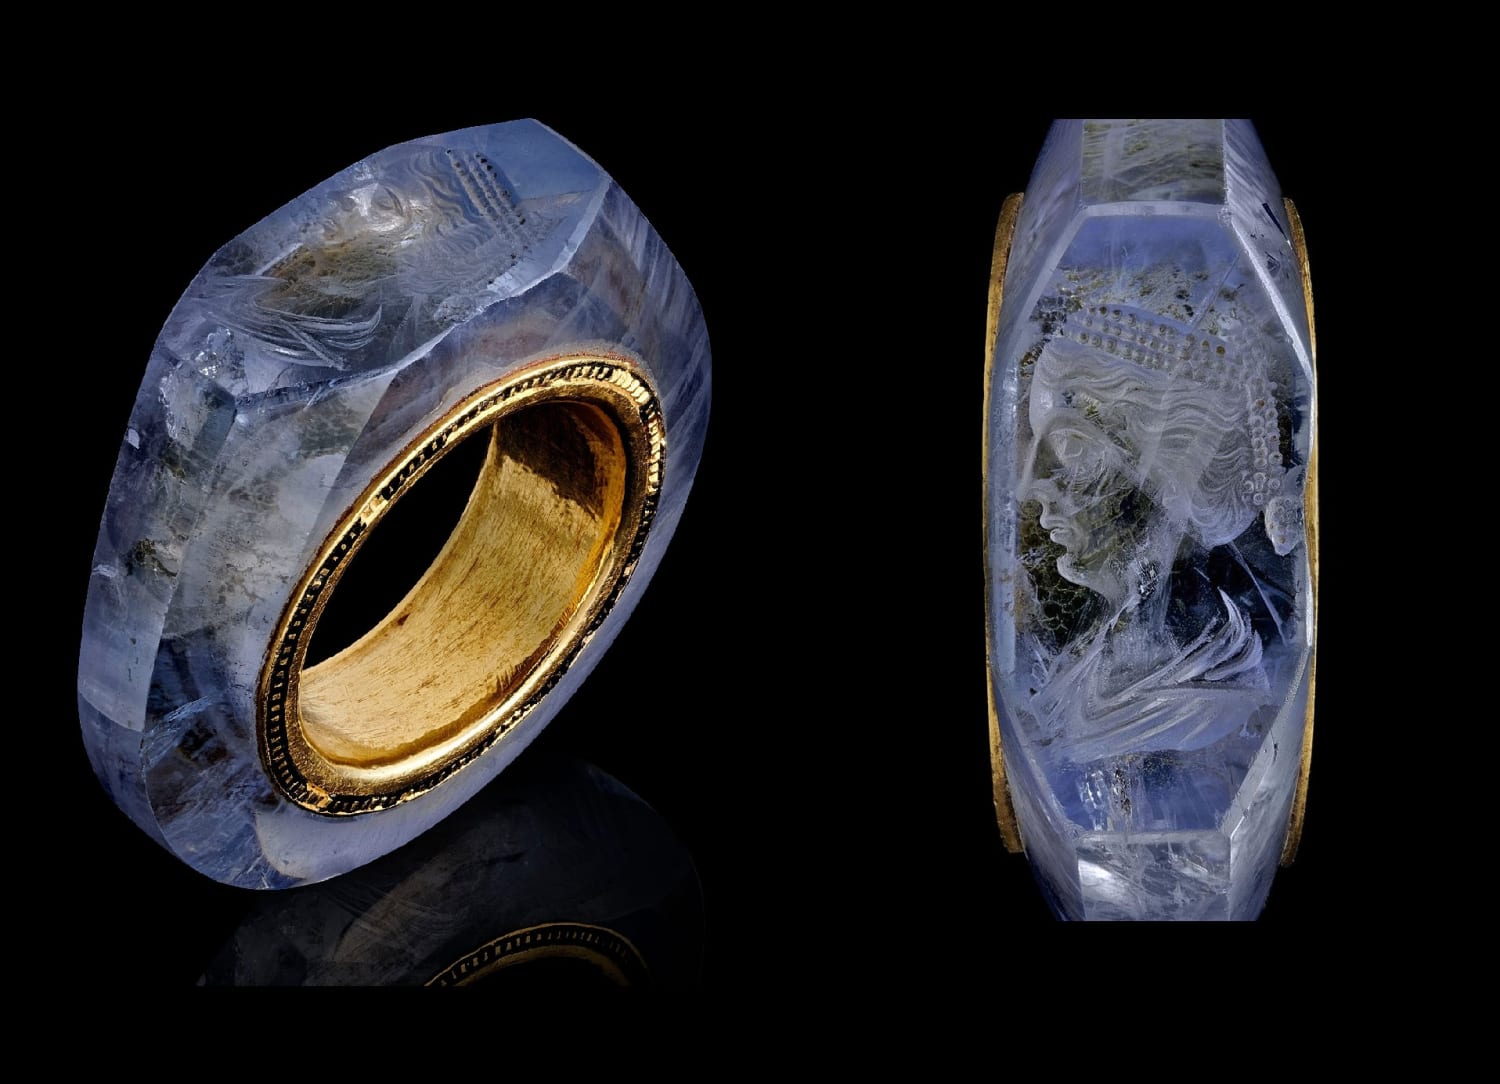 Wonderful 2000 years-old sapphire ring presumably belonged to Roman emperor Caligula, thought depicting his fourth wife Caesonia.